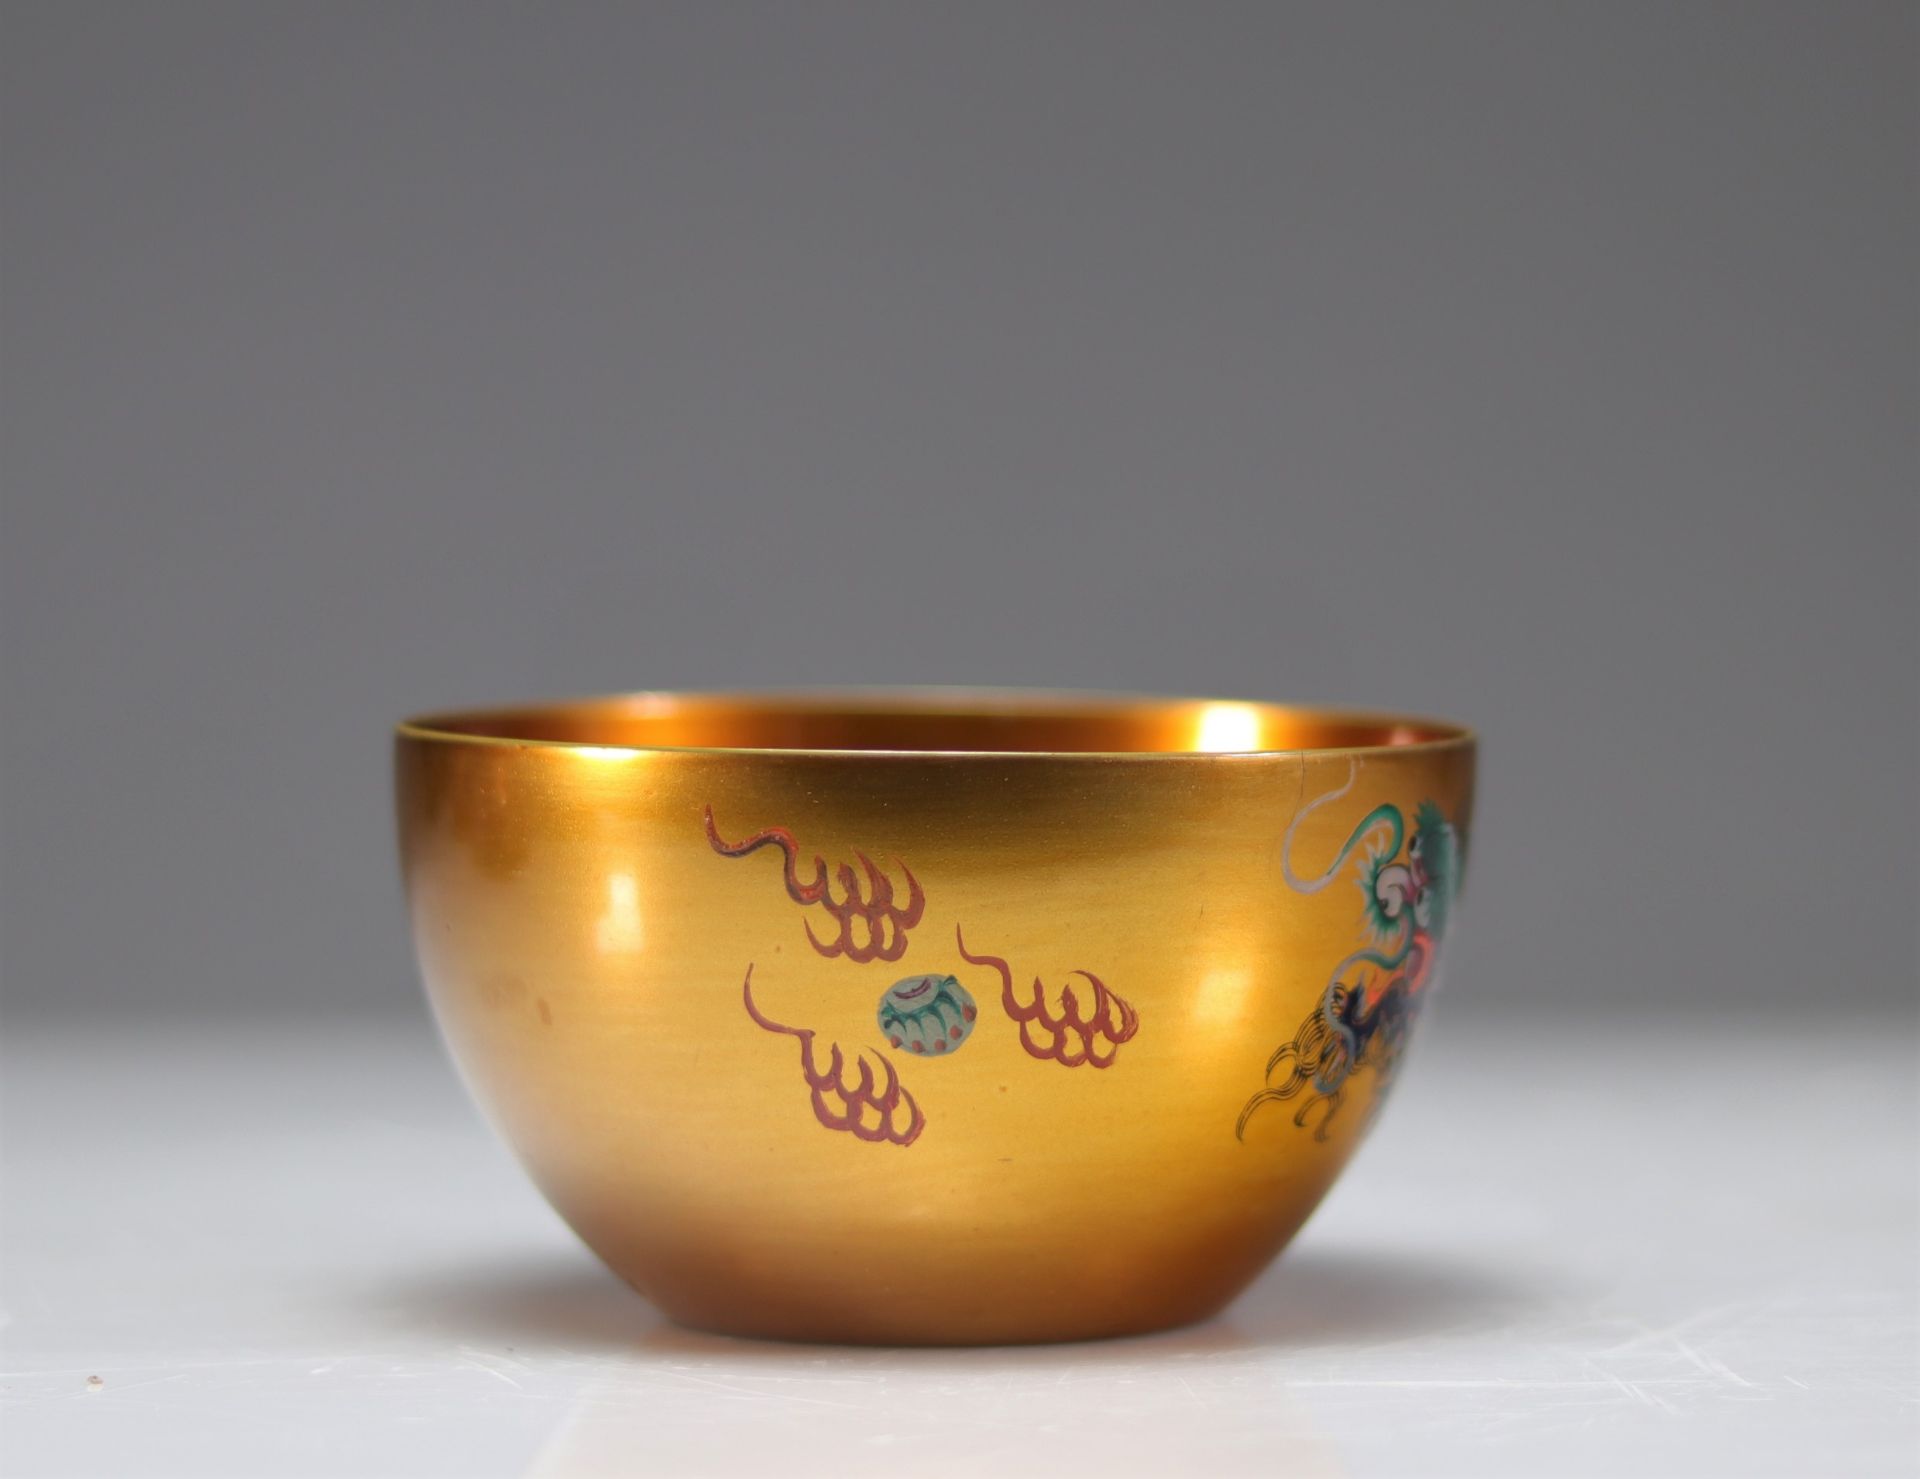 Lot of bowls (6) in Fuzhou lacquer decorated with dragons - Image 4 of 5